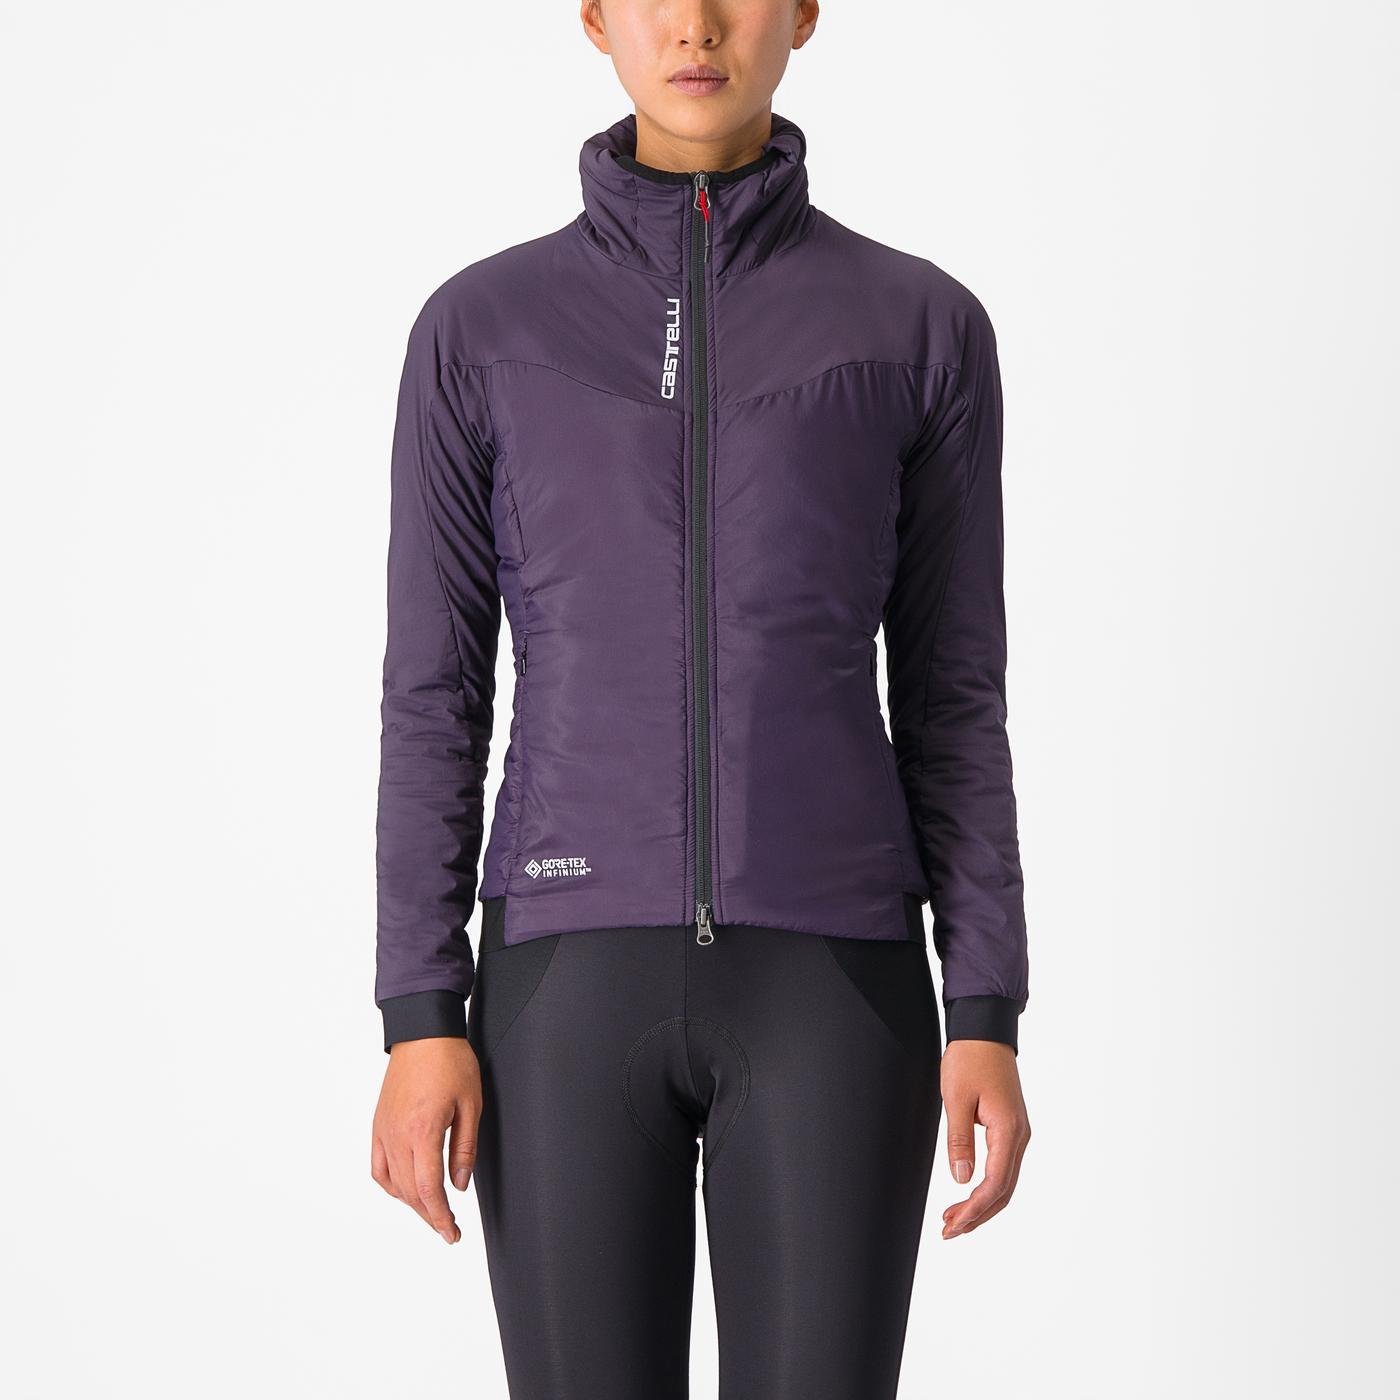 Jackets Cycling Woman FLY THERMAL W JACKET - Castelli Cycling | Jacken